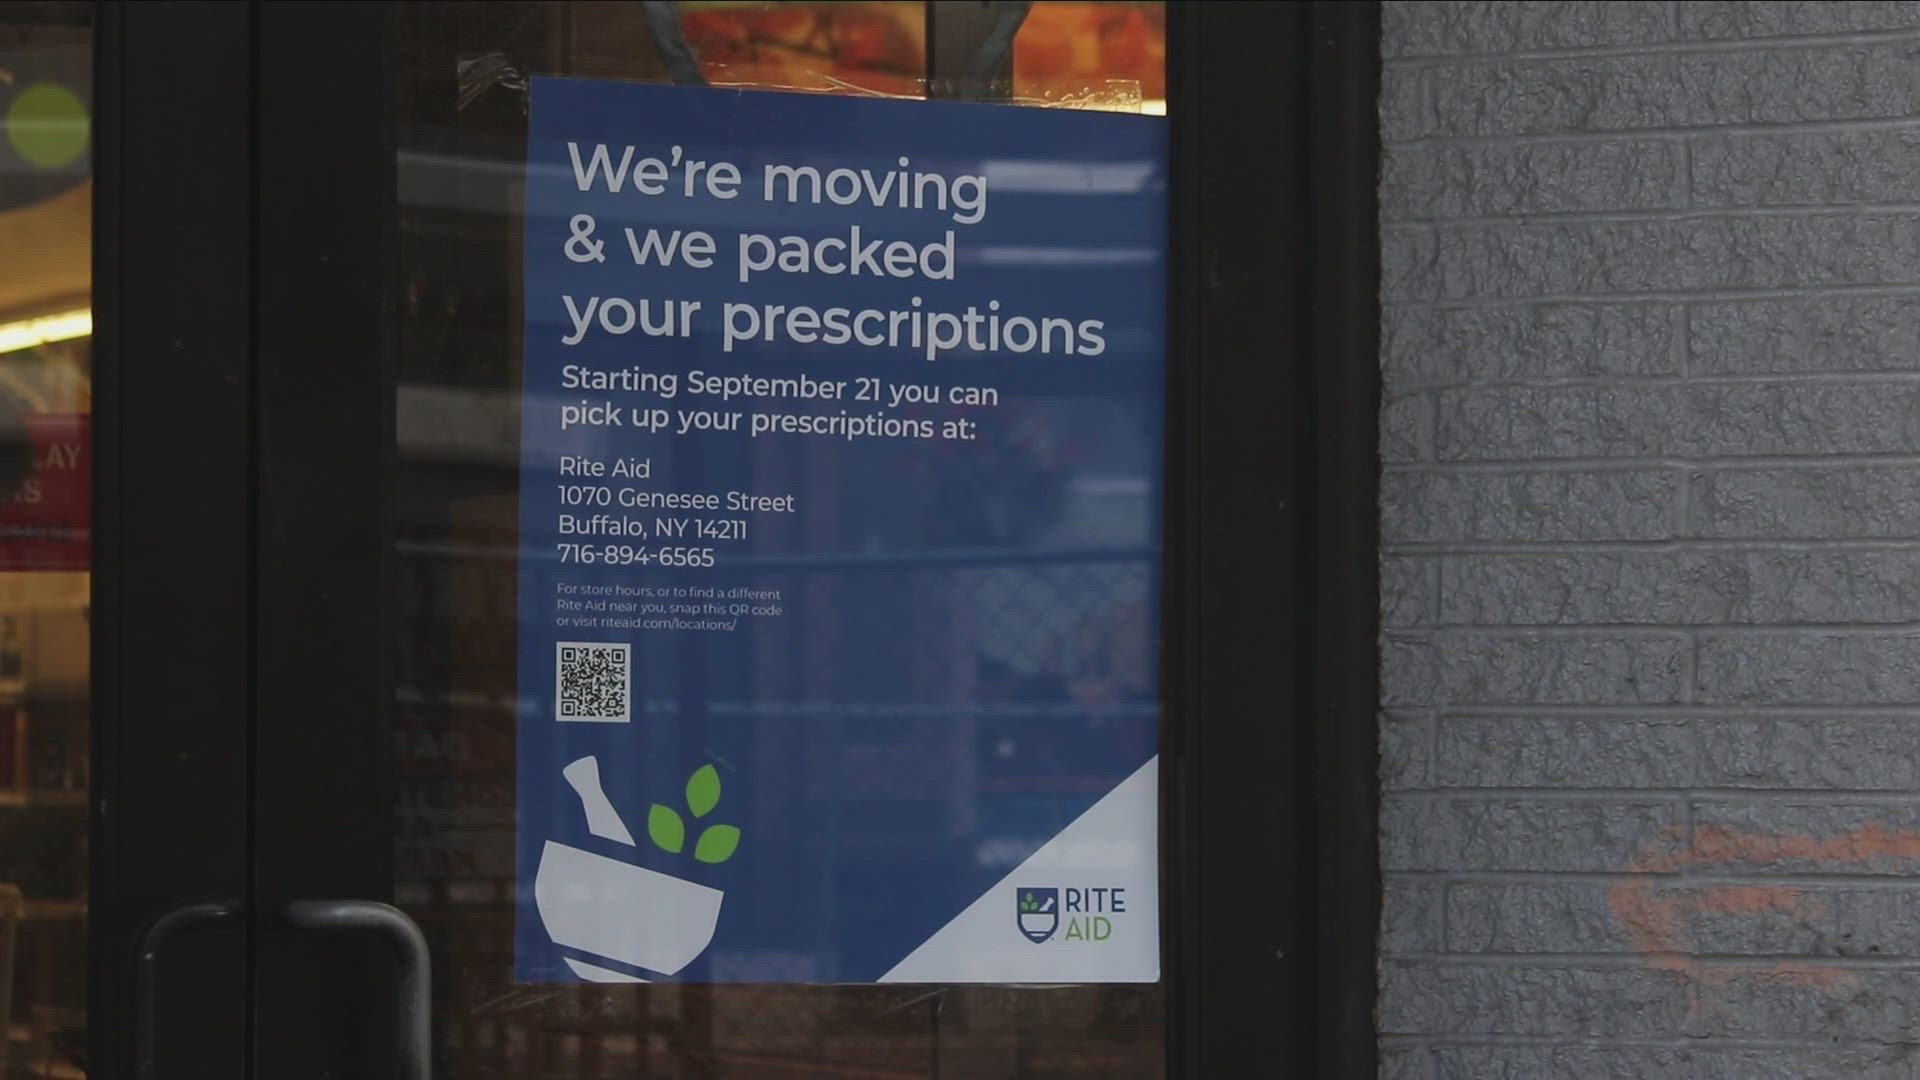 With Rite Aid closing their Main Street location, there is no pharmacy in downtown Buffalo